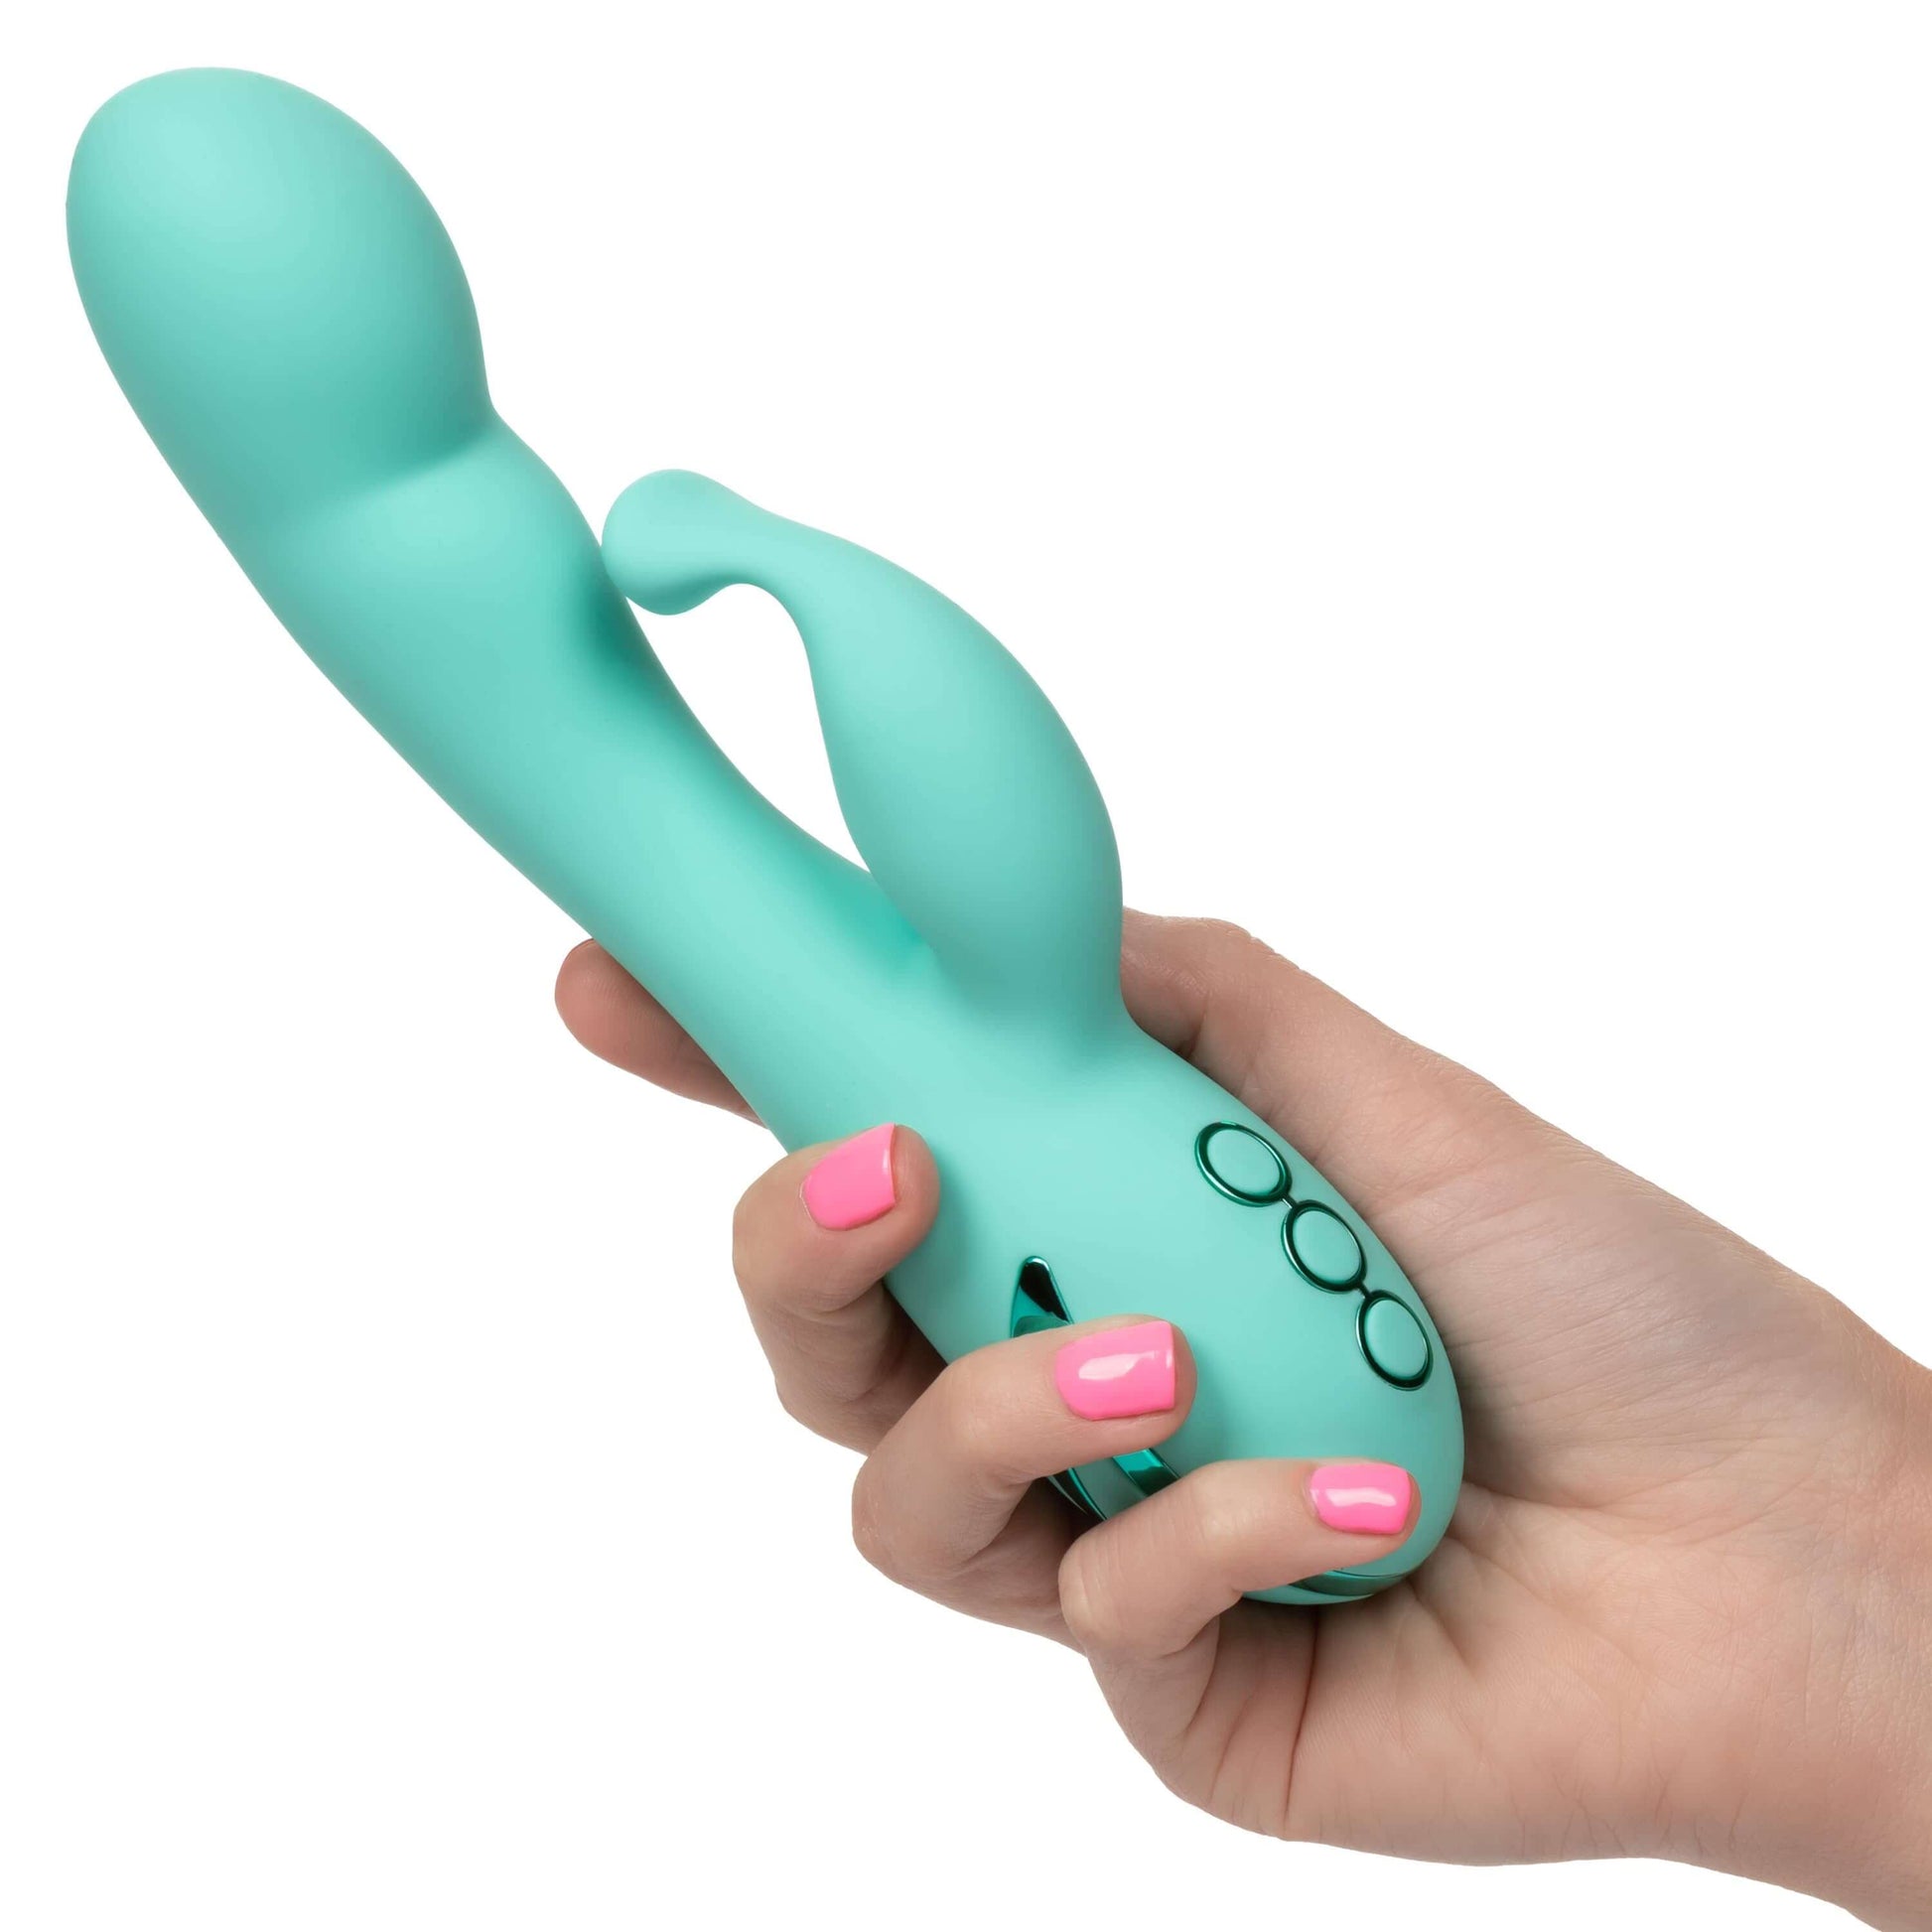 California Dreaming Tahoe Temptation Double Vibrator - Thorn & Feather Sex Toy Canada